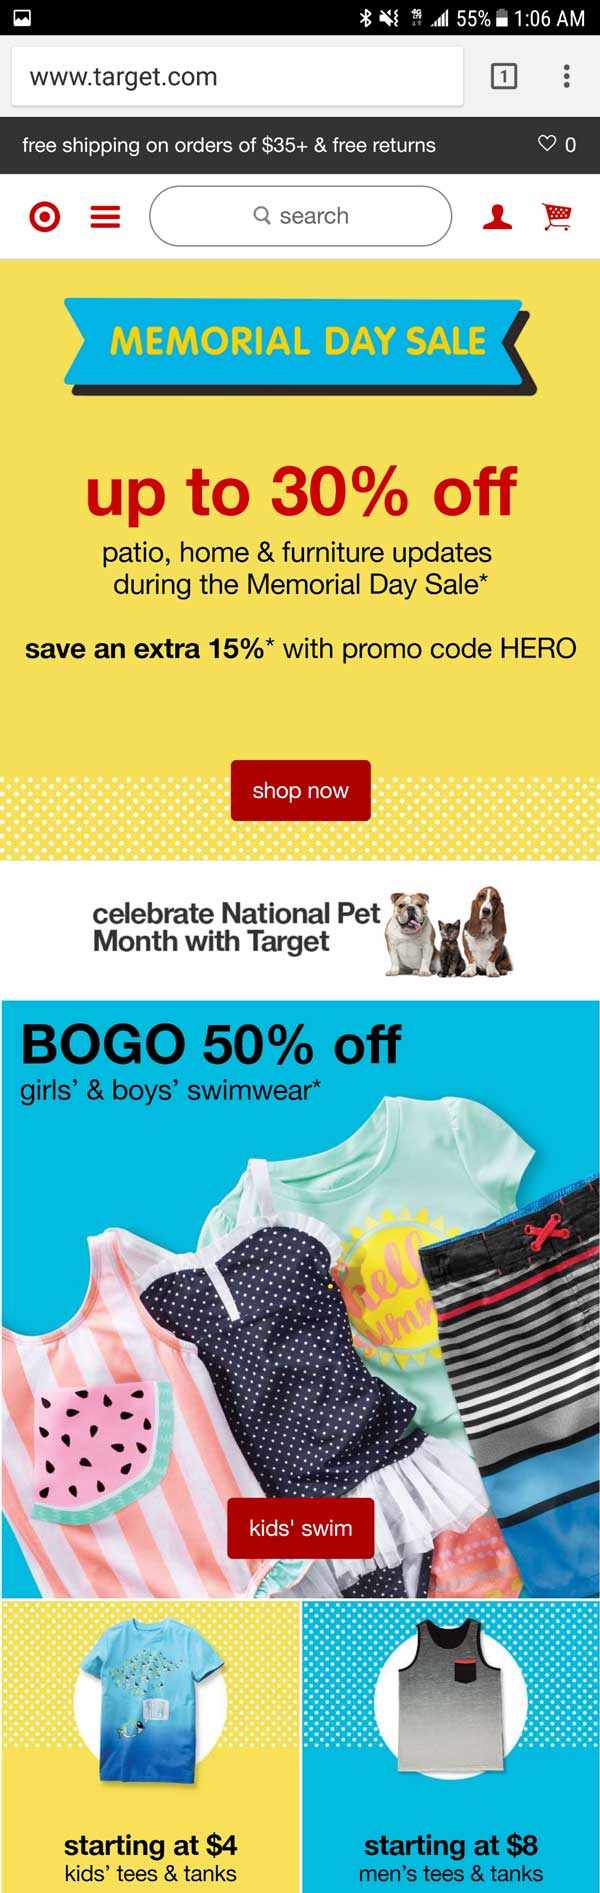 Target's Mobile Home Page Is Tapable